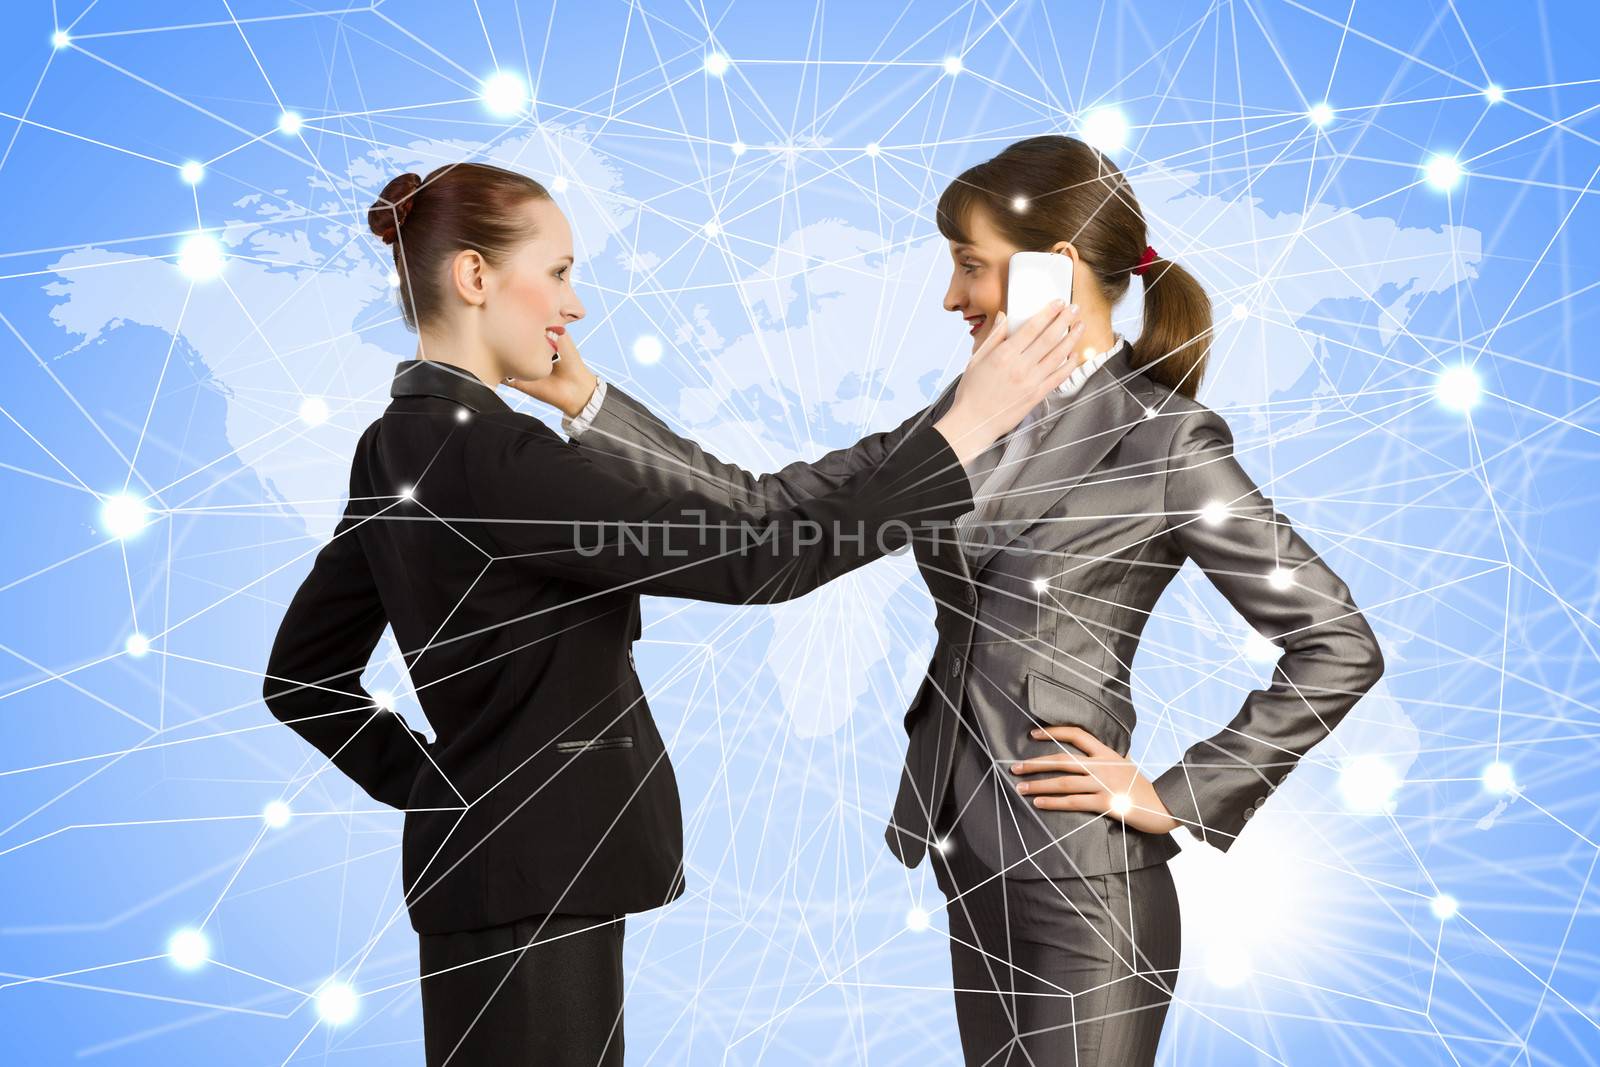 Two businesswomen talking on mobile phone. Cooperation concept